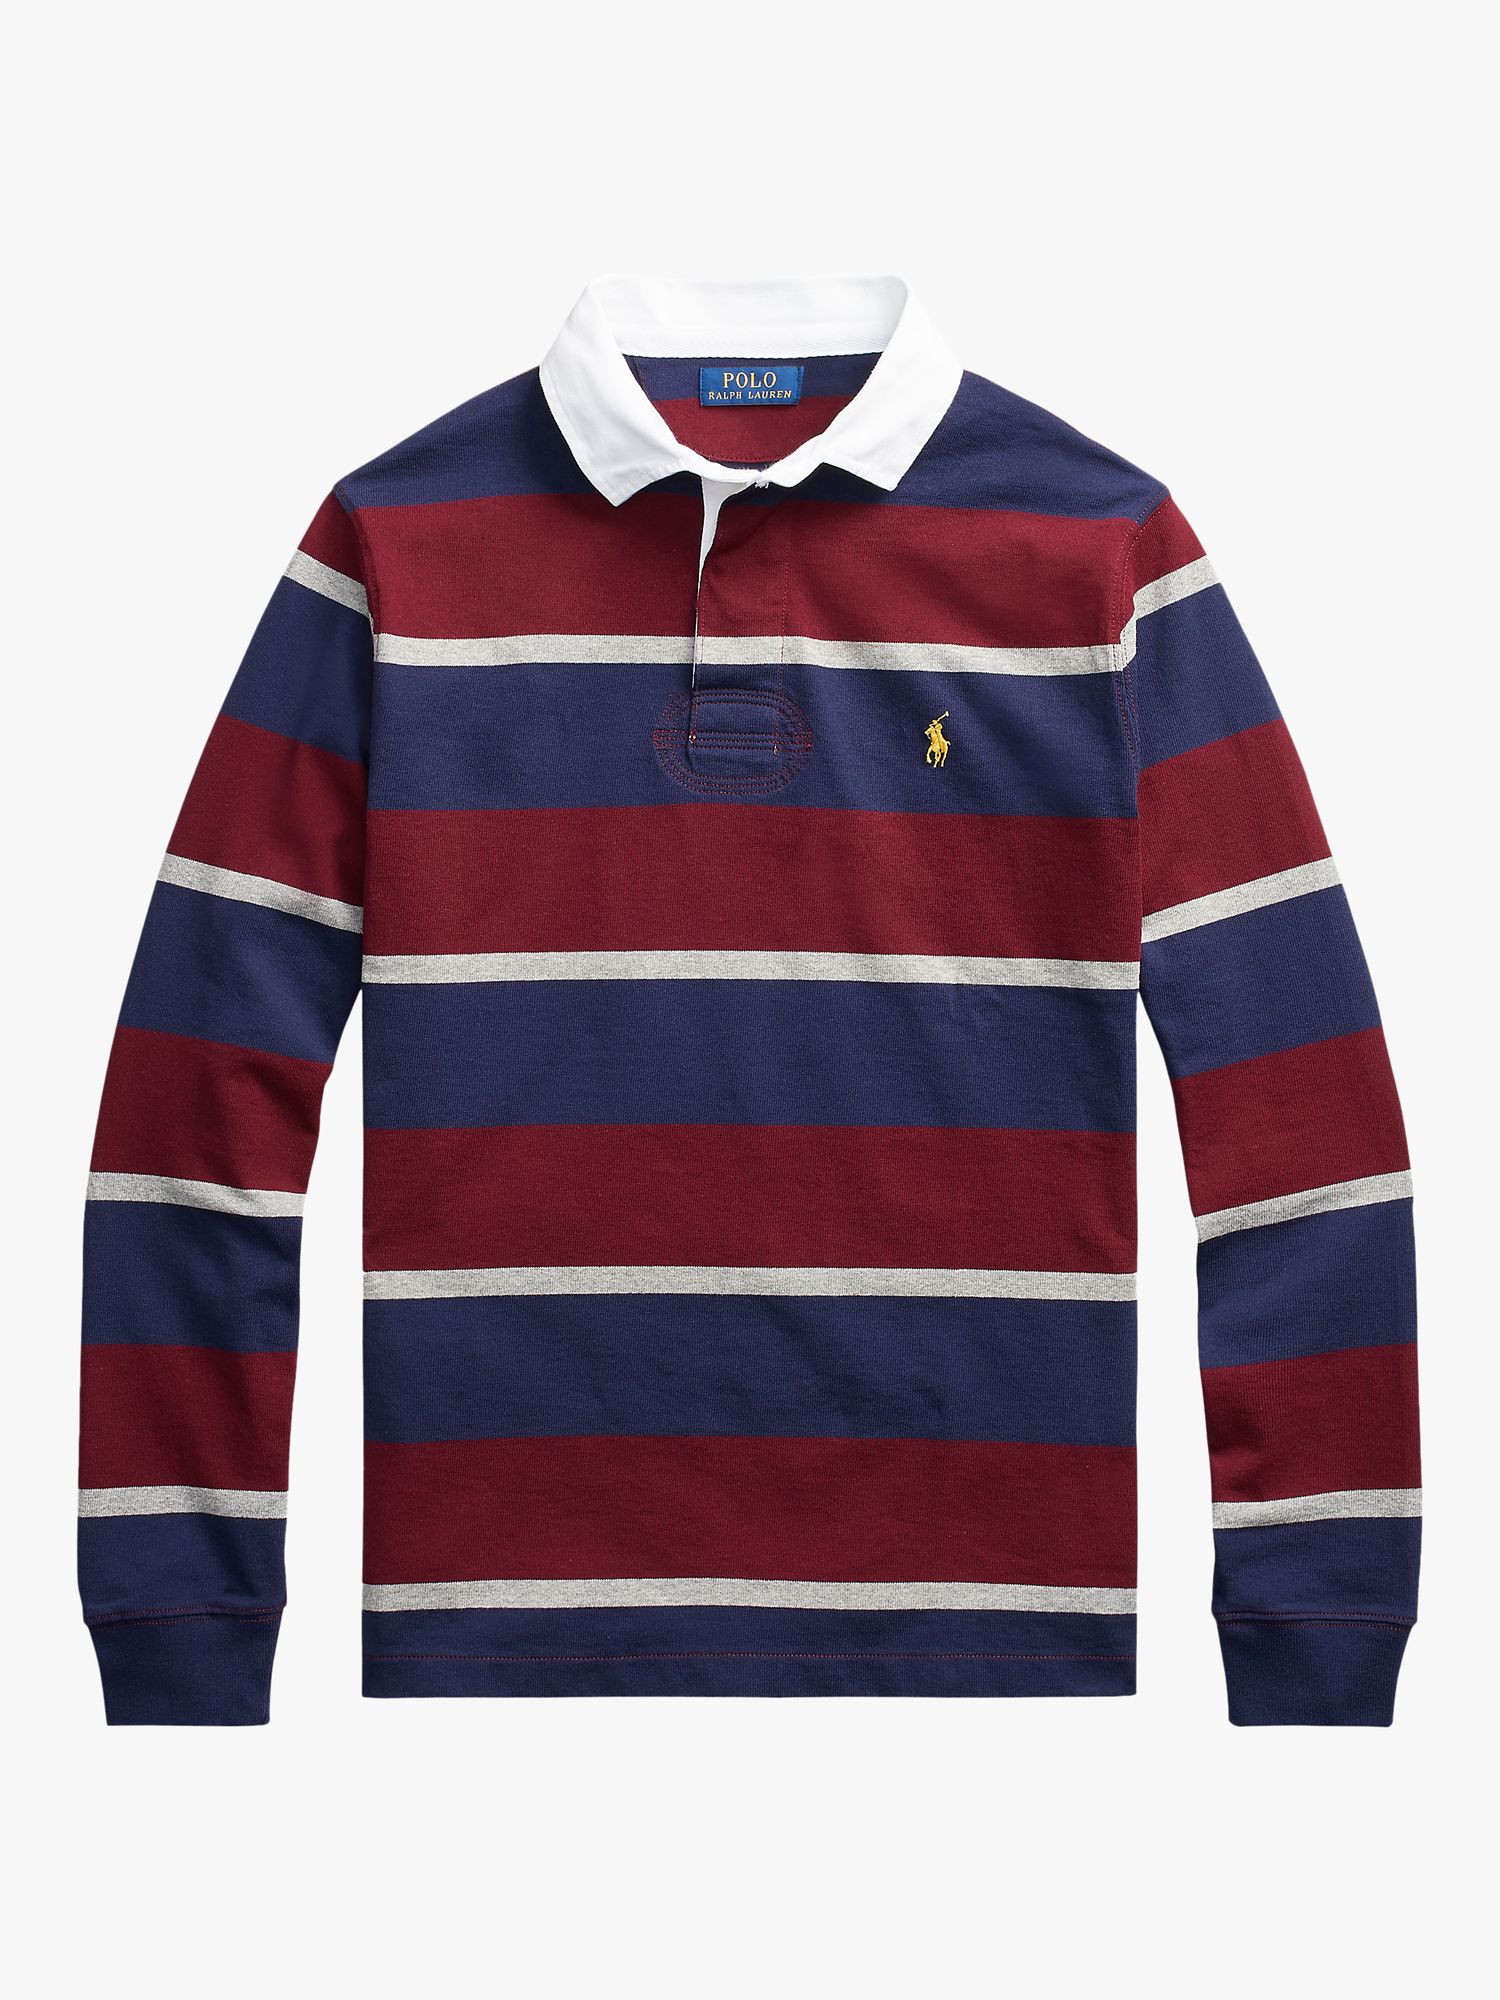 polo ralph lauren rugby sweater